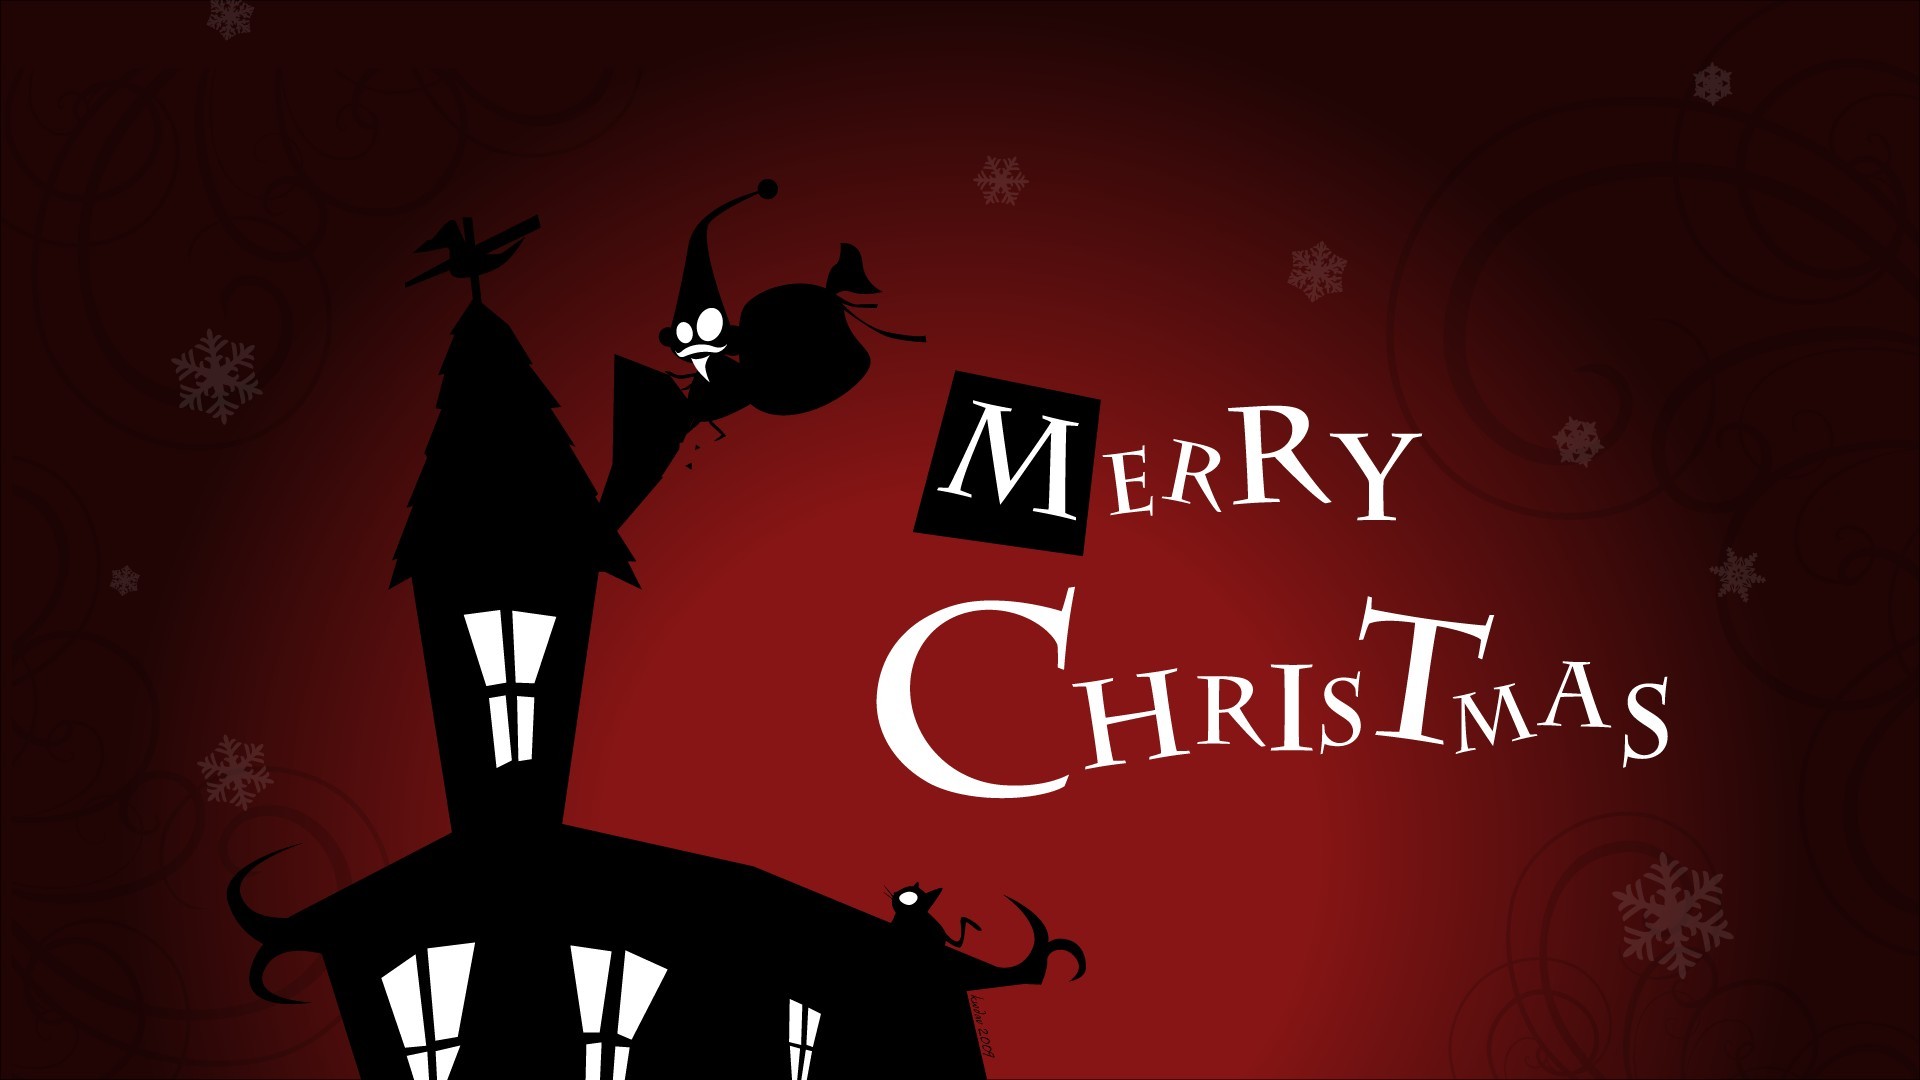 1920x1080 Merry Christmas Cartoon Images HD Wallpapers